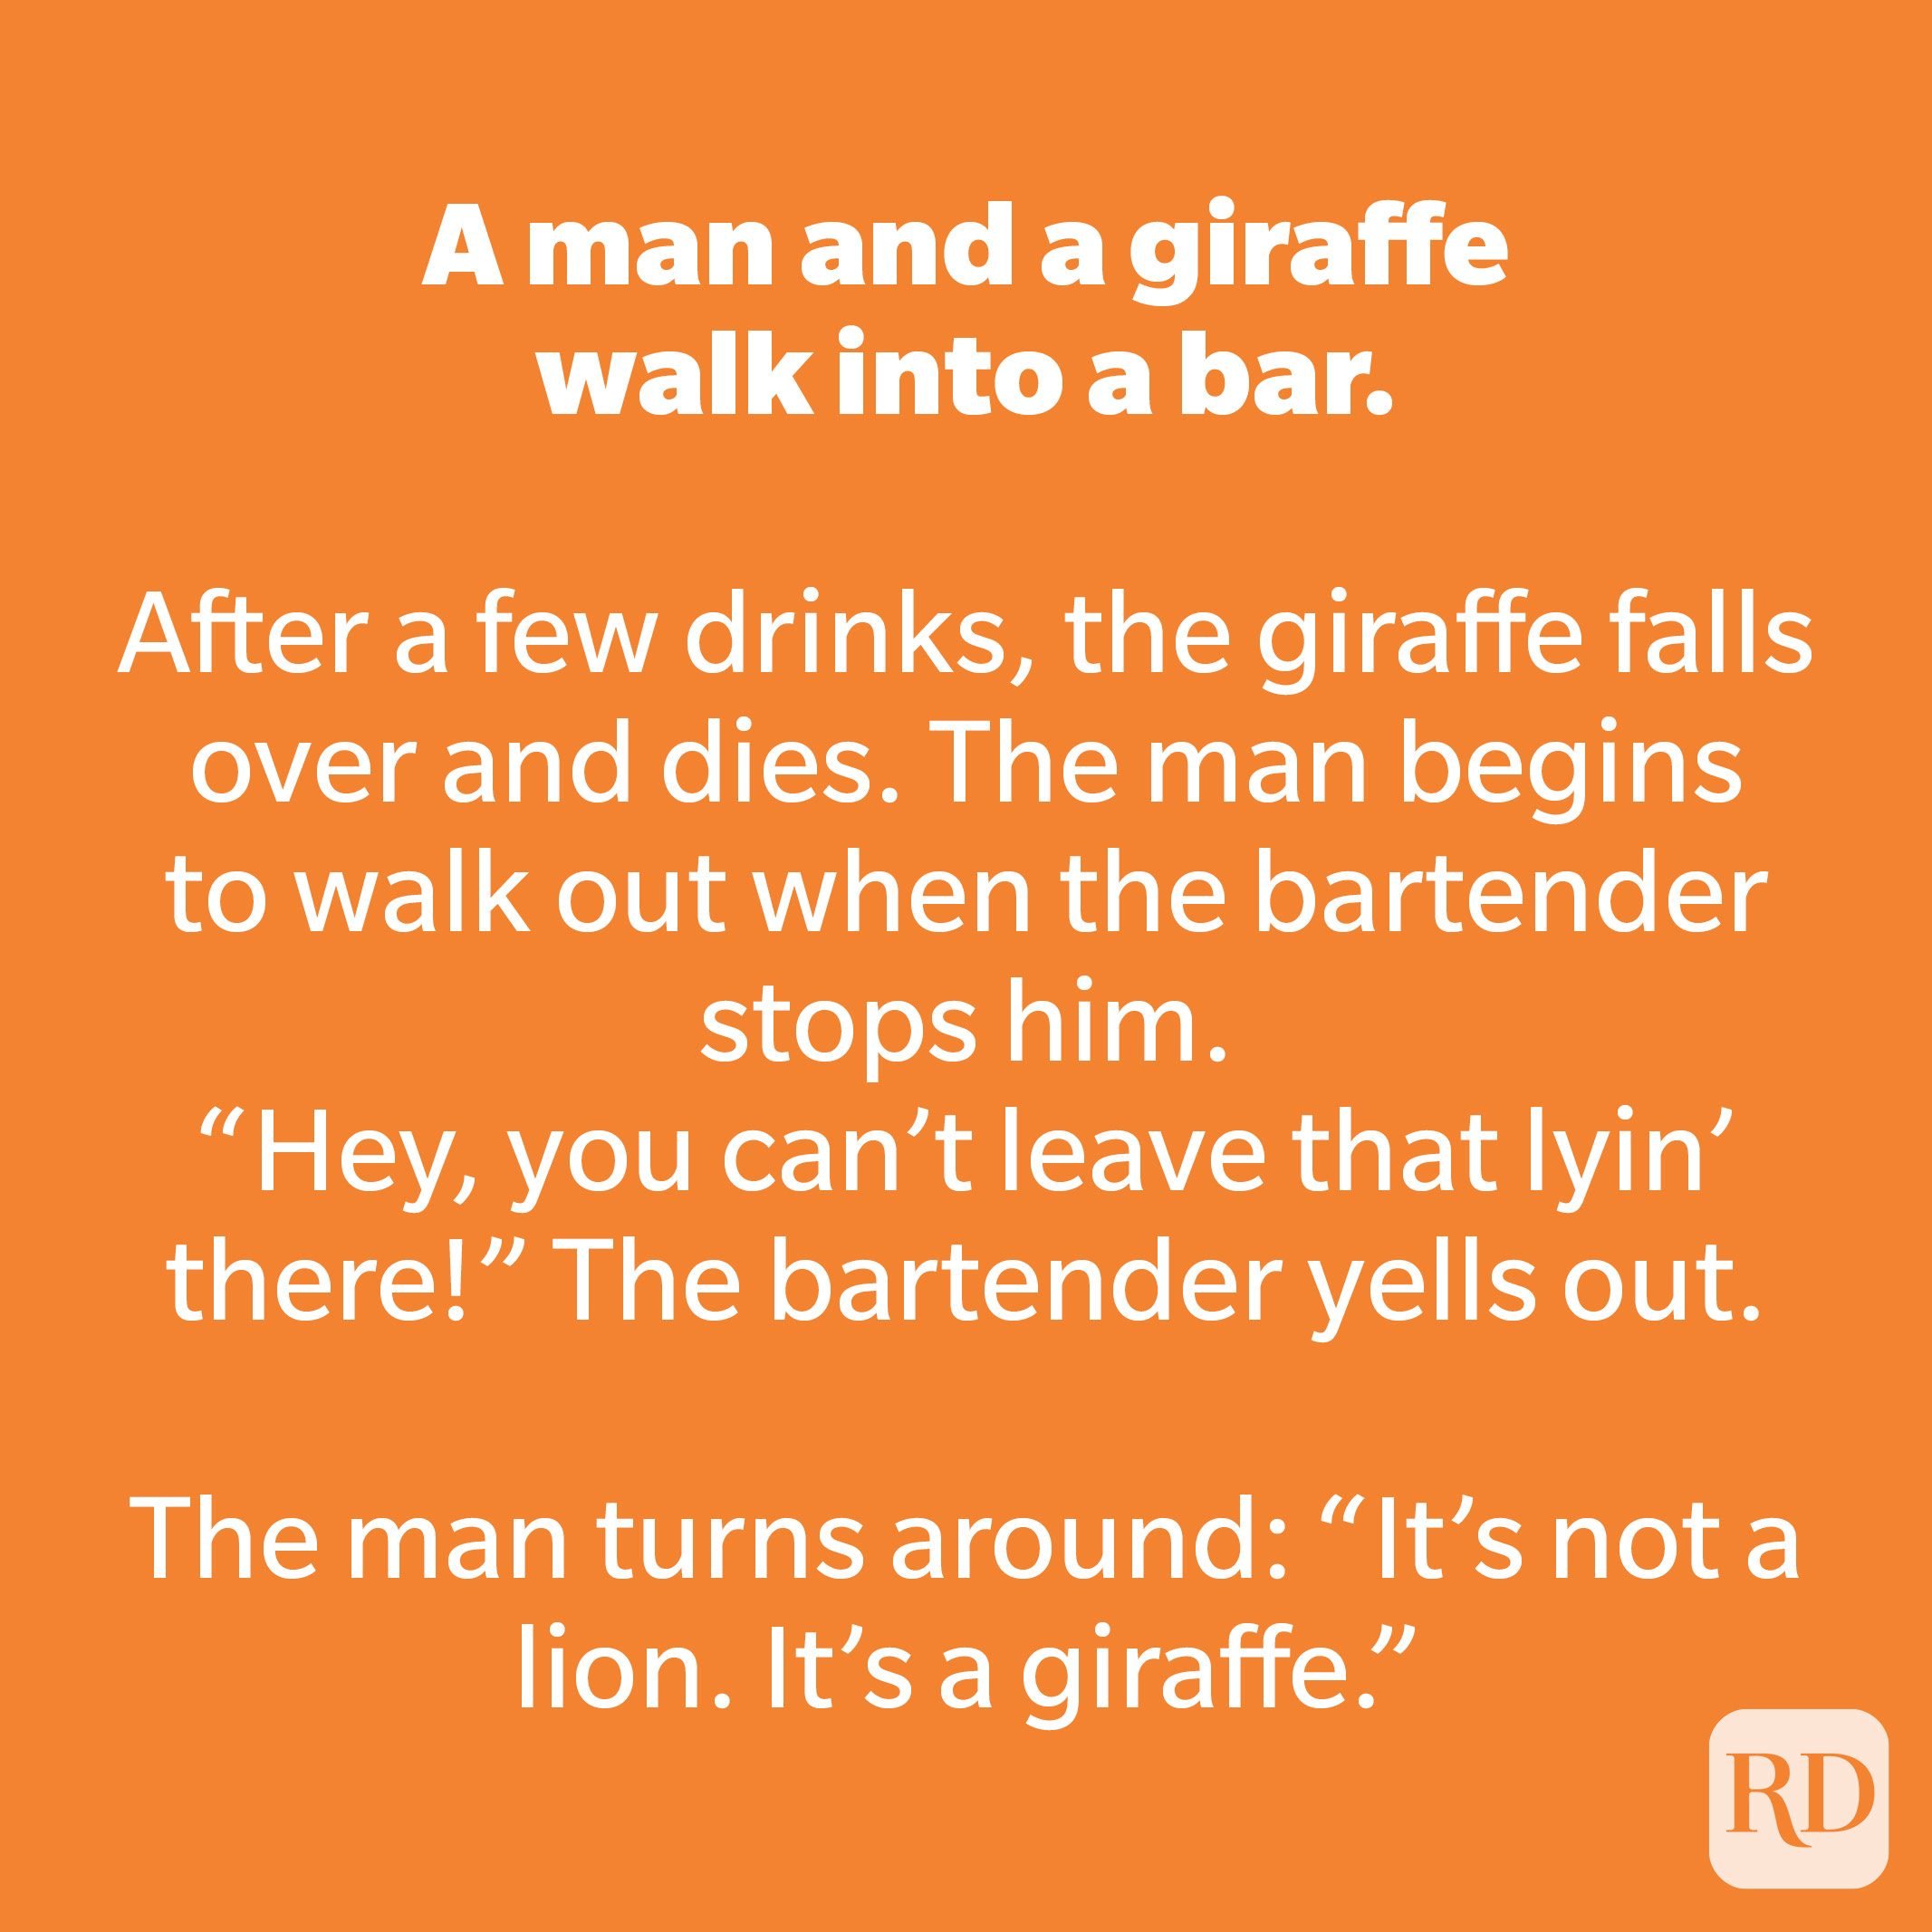 A Collection of 24+ Clever and Amusing Jokes That Are Only